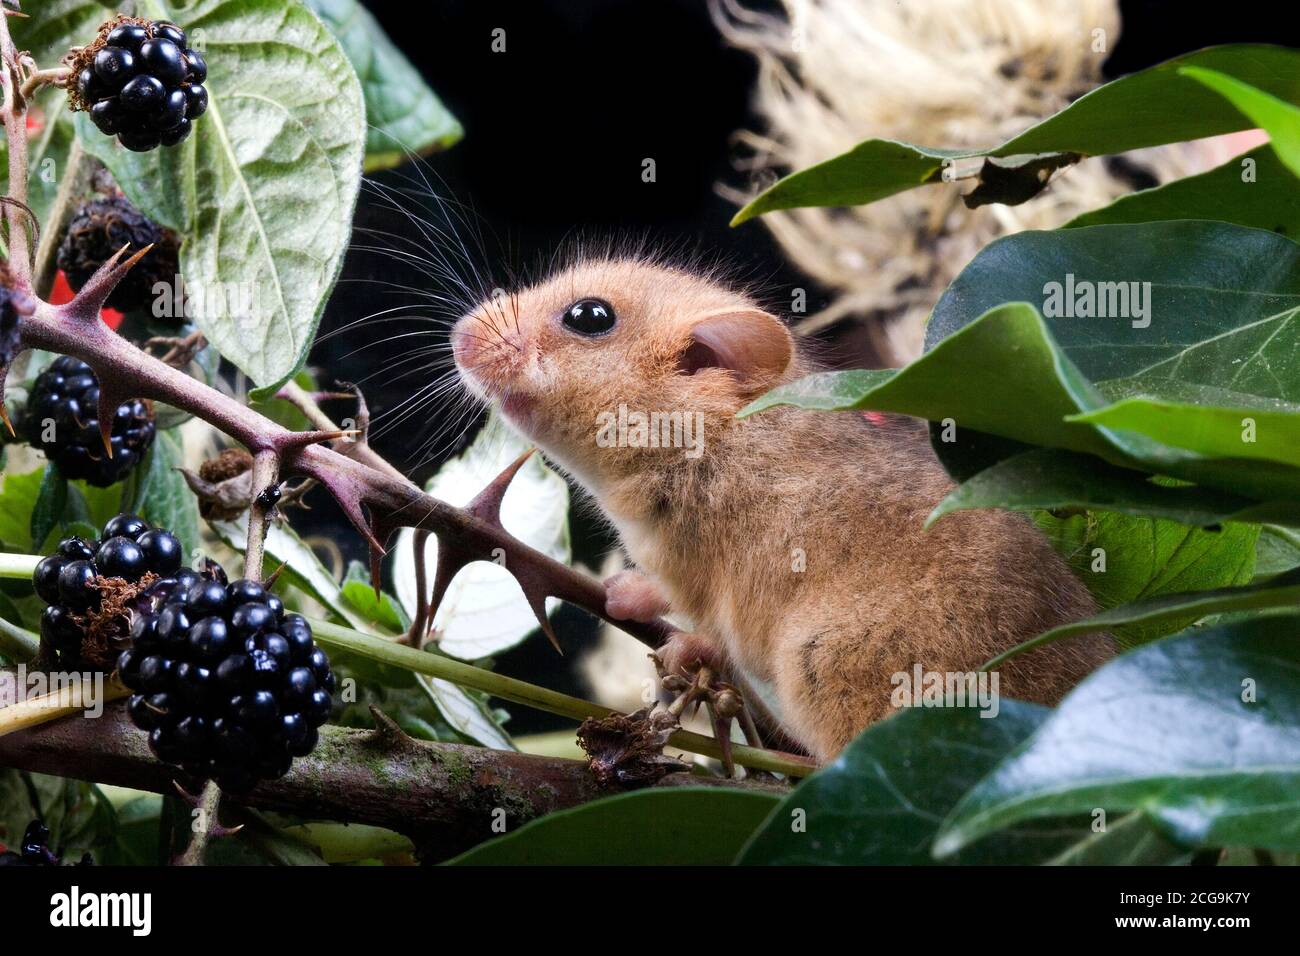 COMMON DORMOUSE muscardinus avellanarius, ADULT STANDING IN BRAMBLE, NORMANDY IN FRANCE Stock Photo